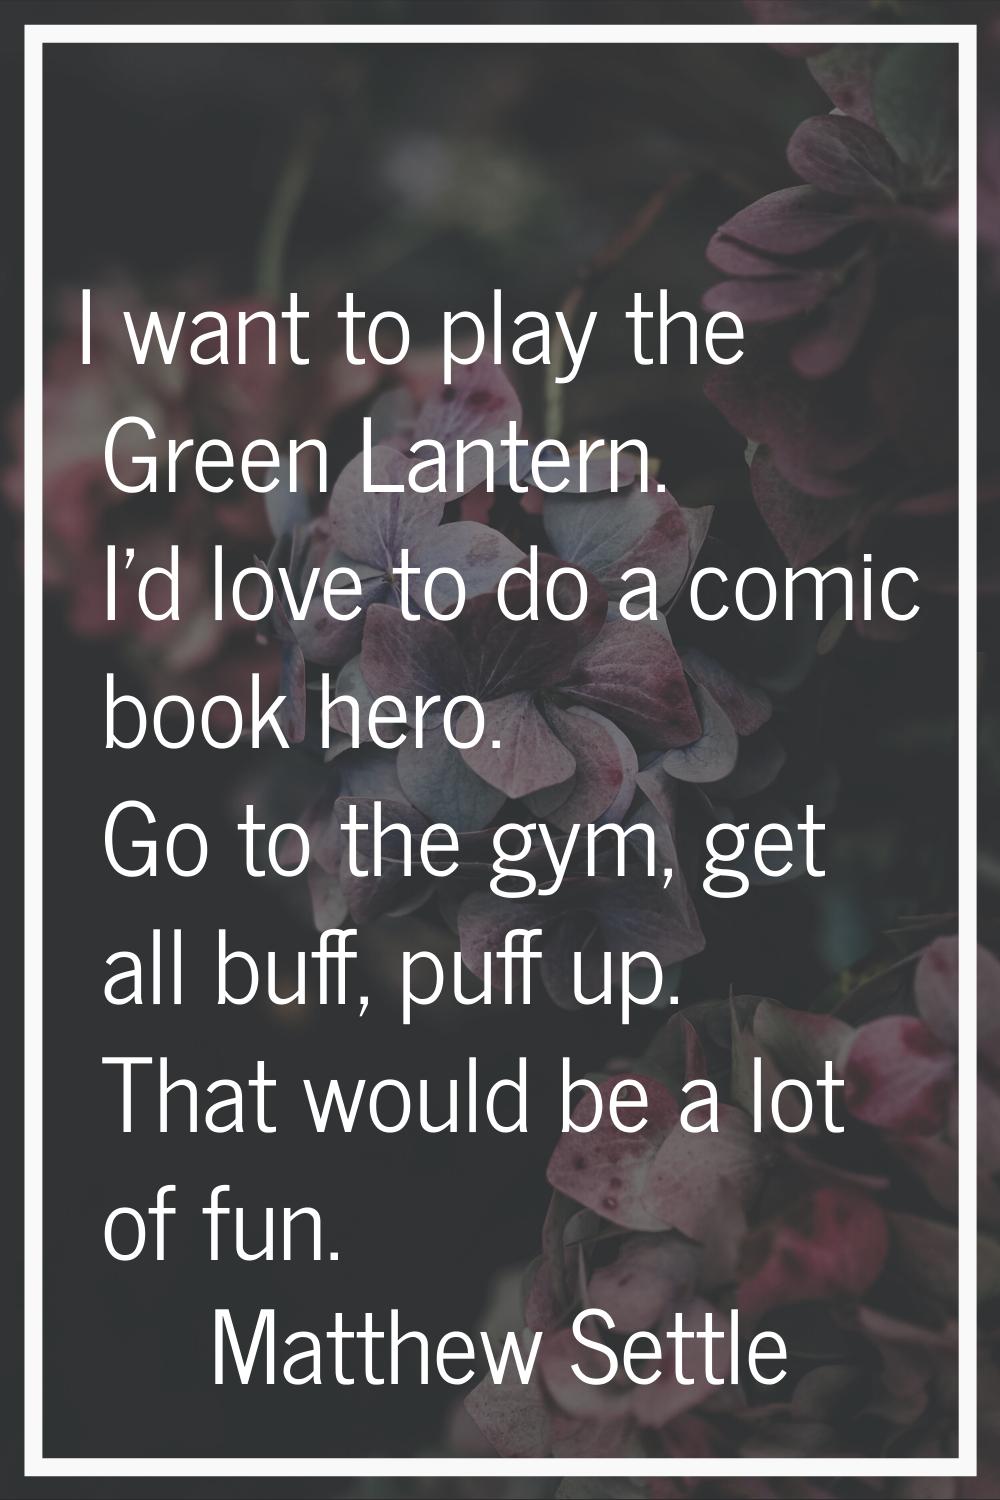 I want to play the Green Lantern. I'd love to do a comic book hero. Go to the gym, get all buff, pu